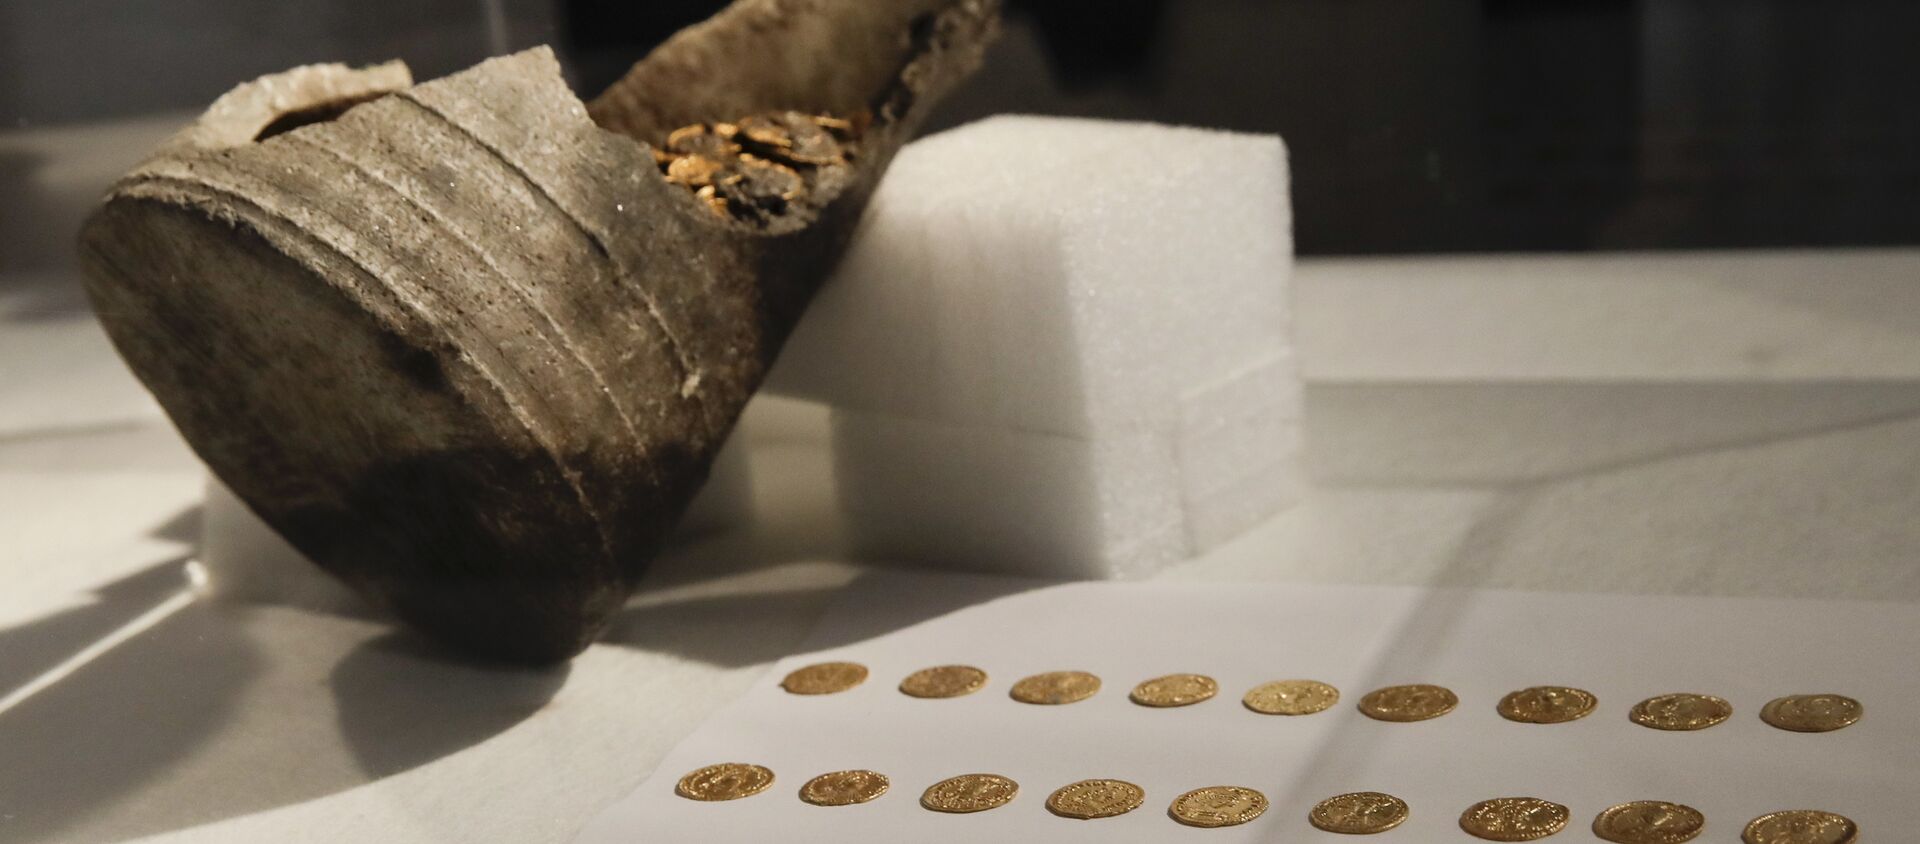 Ancient gold coins are displayed in a plexiglass case during a news conference, in Milan, Italy, Monday, Sept. 10, 2018. Hundreds of gold coins of the late imperial era, kept in a soapstone vessel of uncommon shape were discovered last Wednesday in the center of Como, northern Italy, during restructuring works inside a theater. (AP Photo/Luca Bruno) - Sputnik International, 1920, 16.09.2018